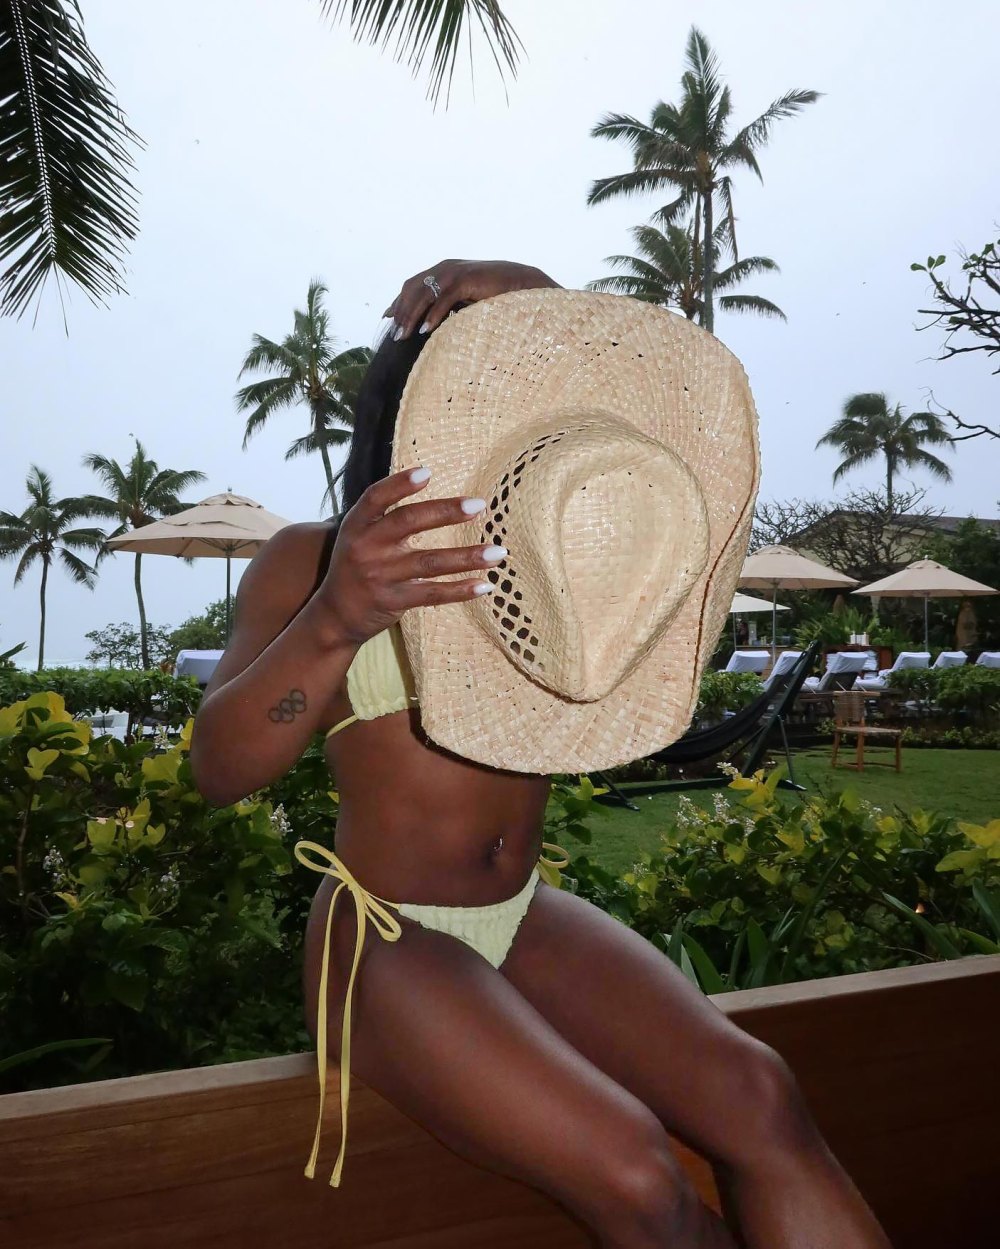 Simone Biles Channels Western Style in Yellow Bikini and Cowboy Hat While On Vacation With Husband